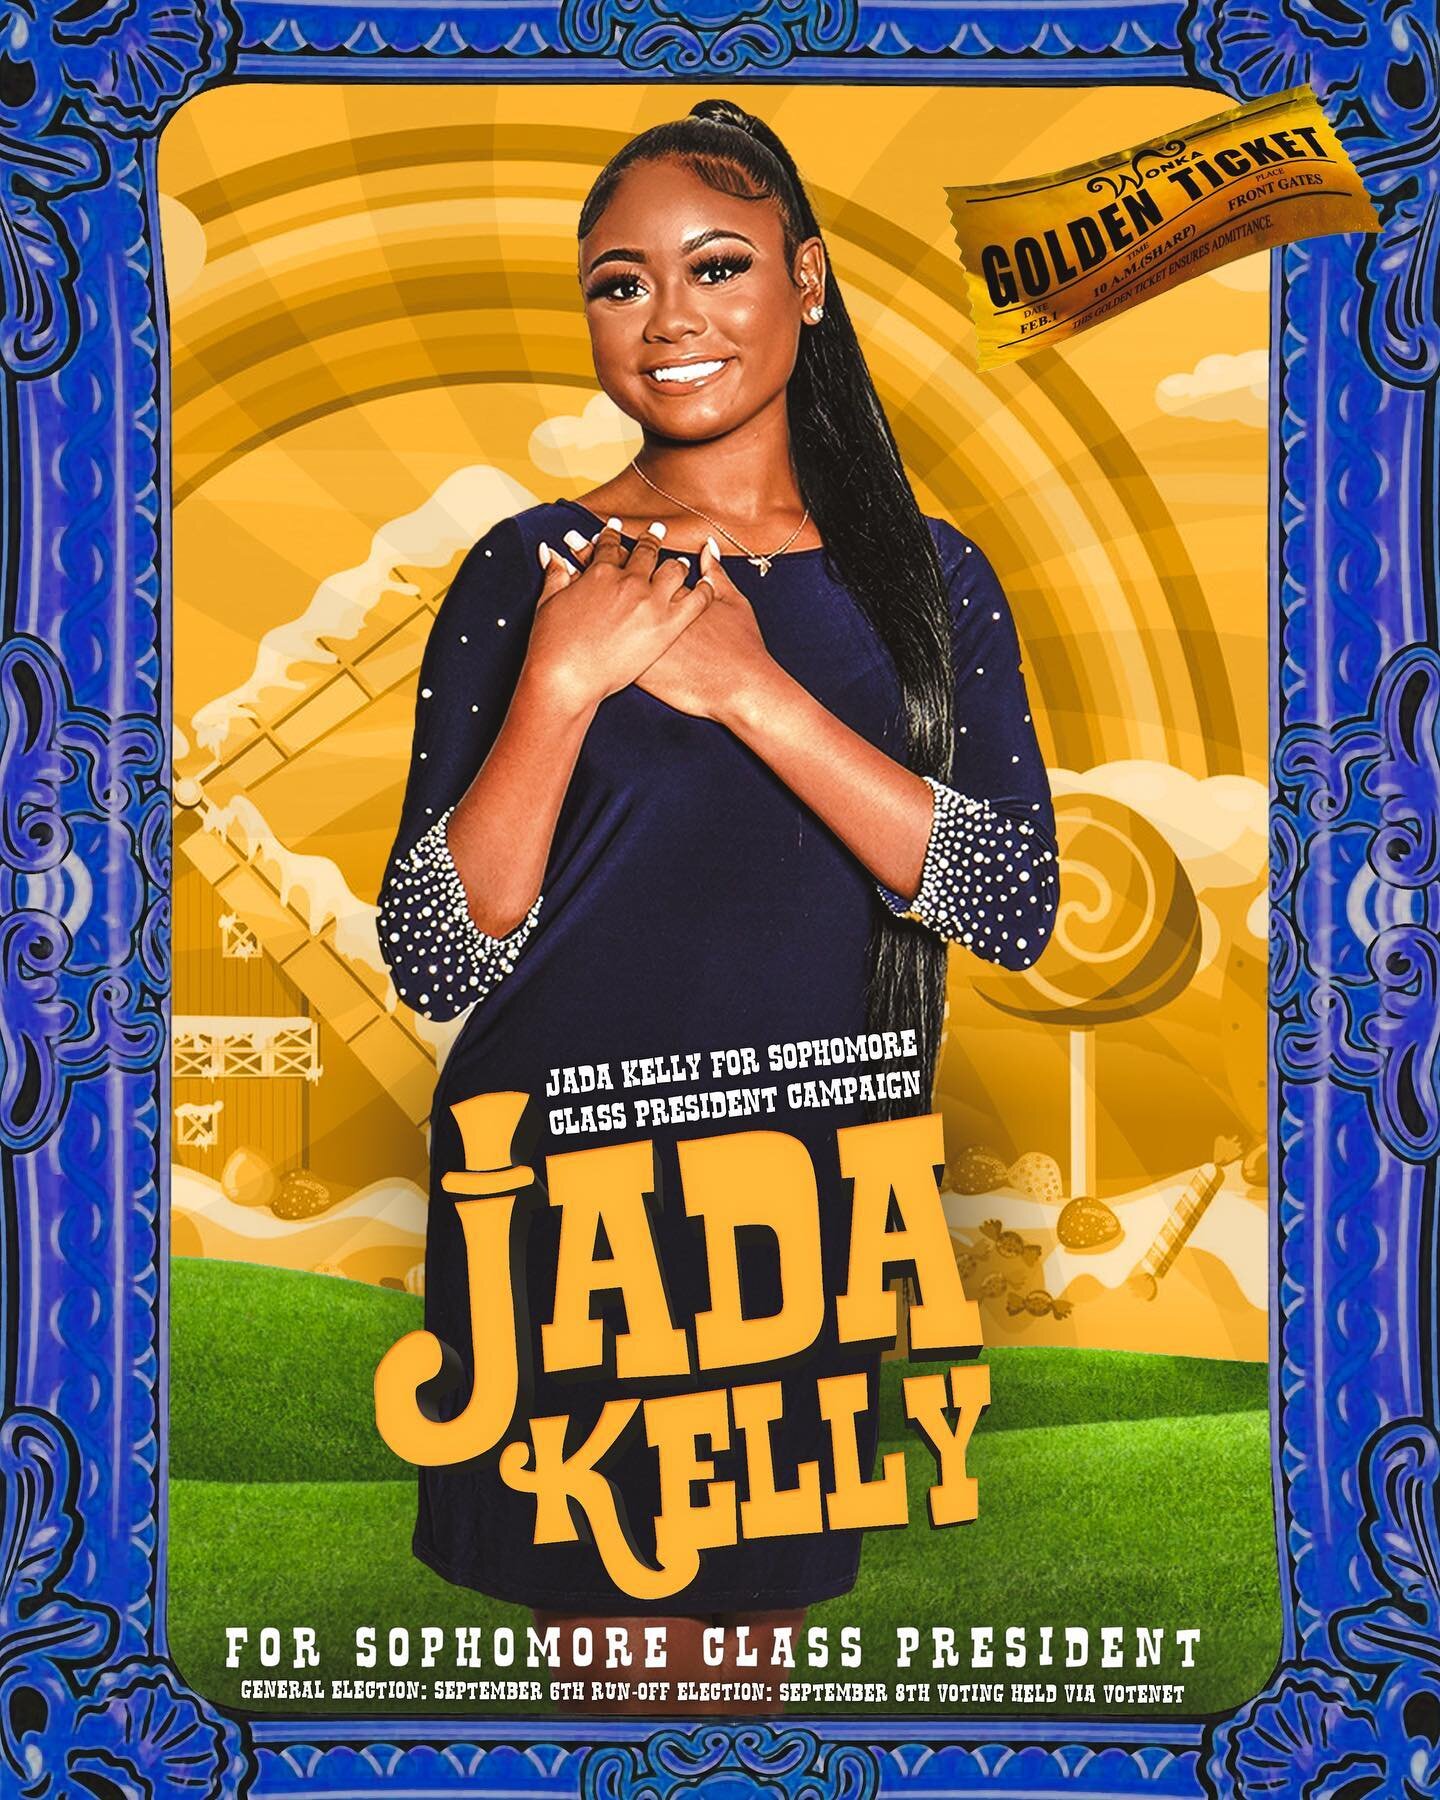 New Willy Wonka Campaign designed for @jadakellyyy! Camping season is here so make sure you book with the best. Thank you for trusting me with your vision! 

#ncat26 #ncat25 #ncat25💙💛 #willywonka #chocolatefactory #campaign #hbcu #hbcucampaign #ste